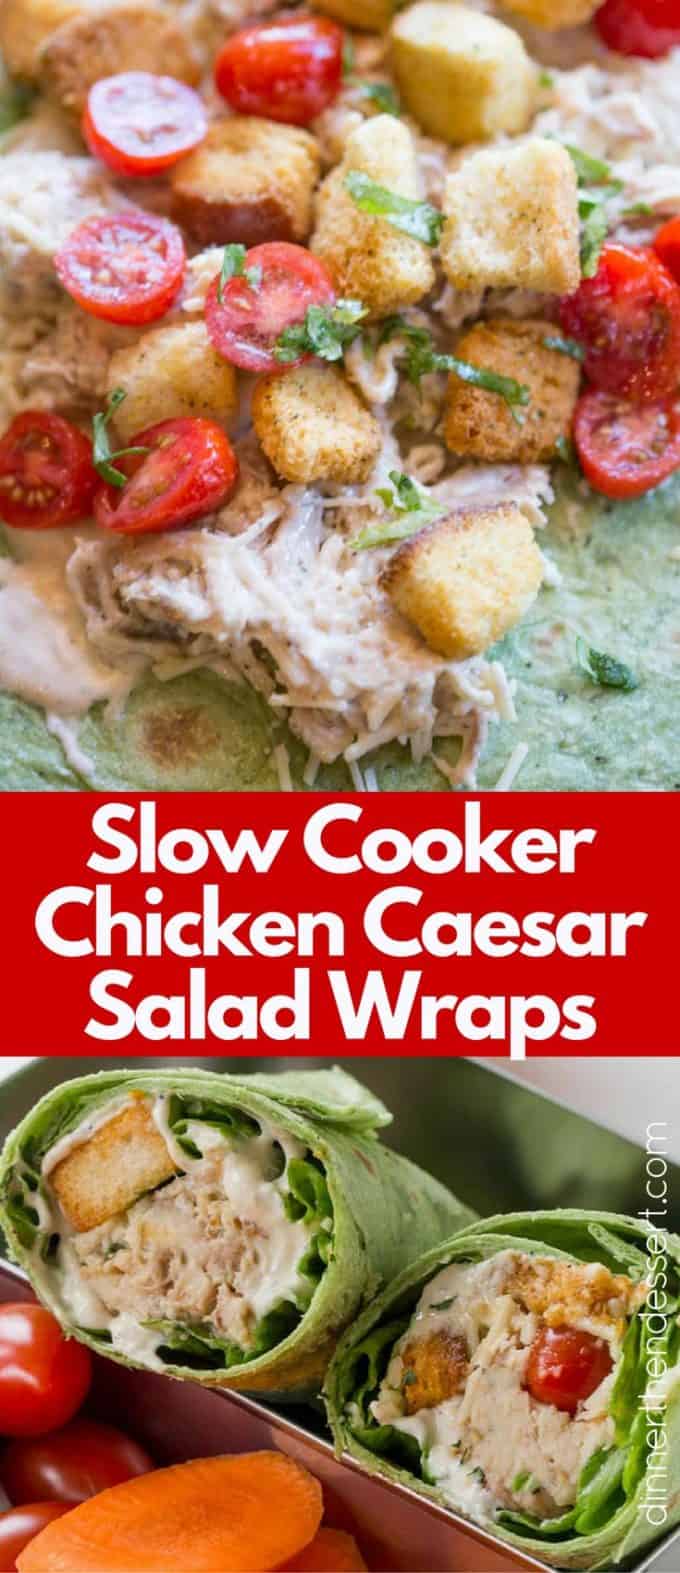 Slow Cooker Chicken Caesar Salad Wraps with shredded chicken, an easy anchovy free caesar dressing, croutons, tomatoes and Parmesan cheese in a spinach tortilla. Perfect for your lunchbox!